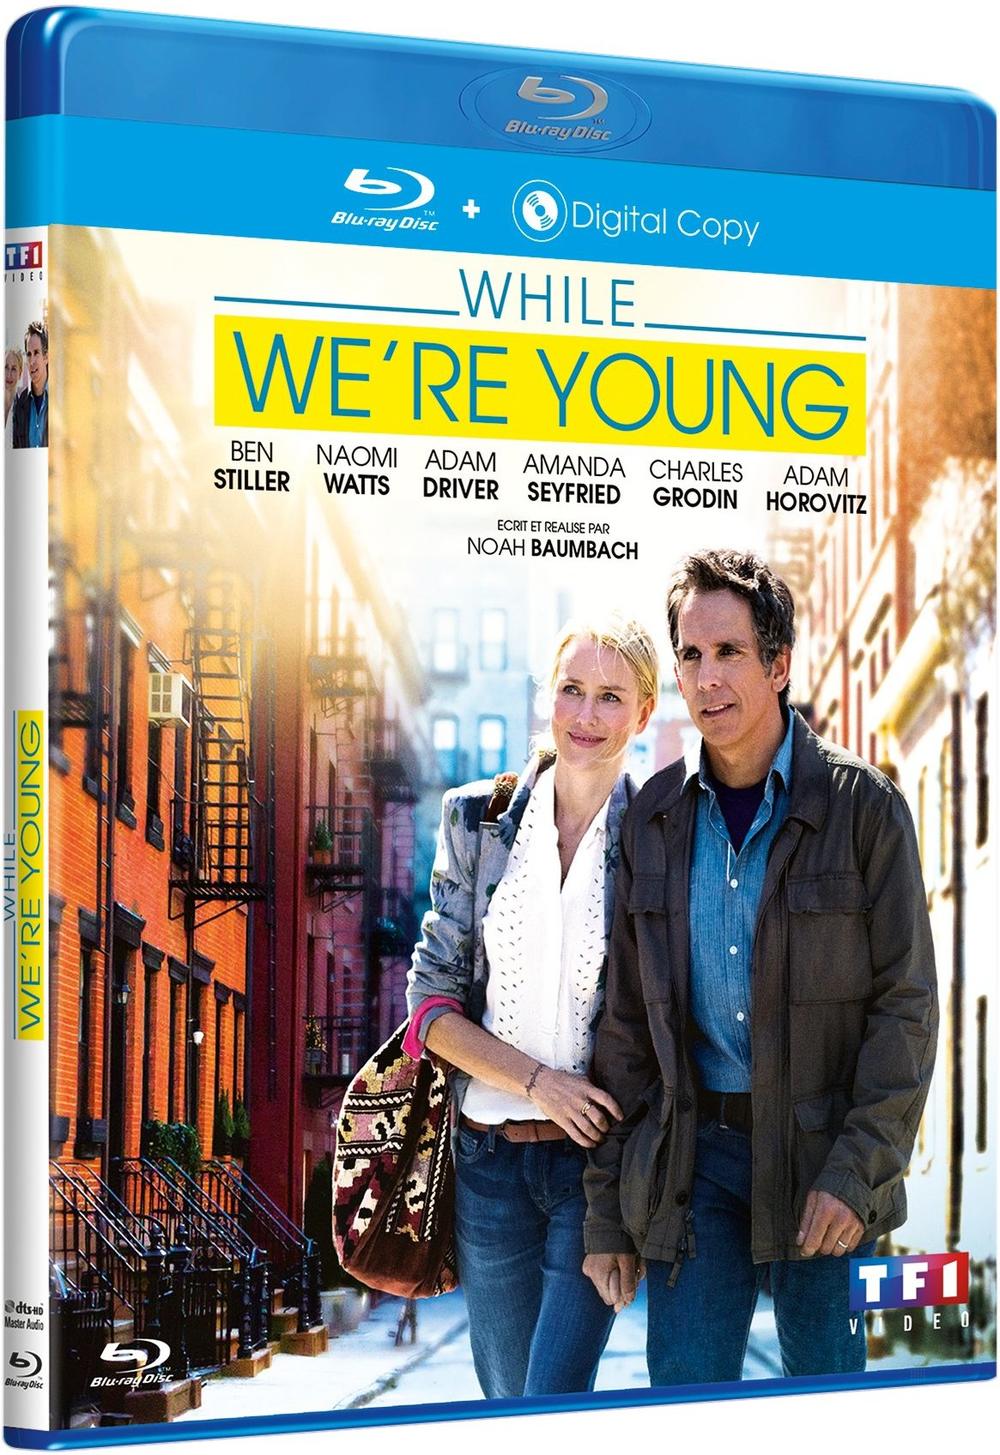 WHILE WE'RE YOUNG